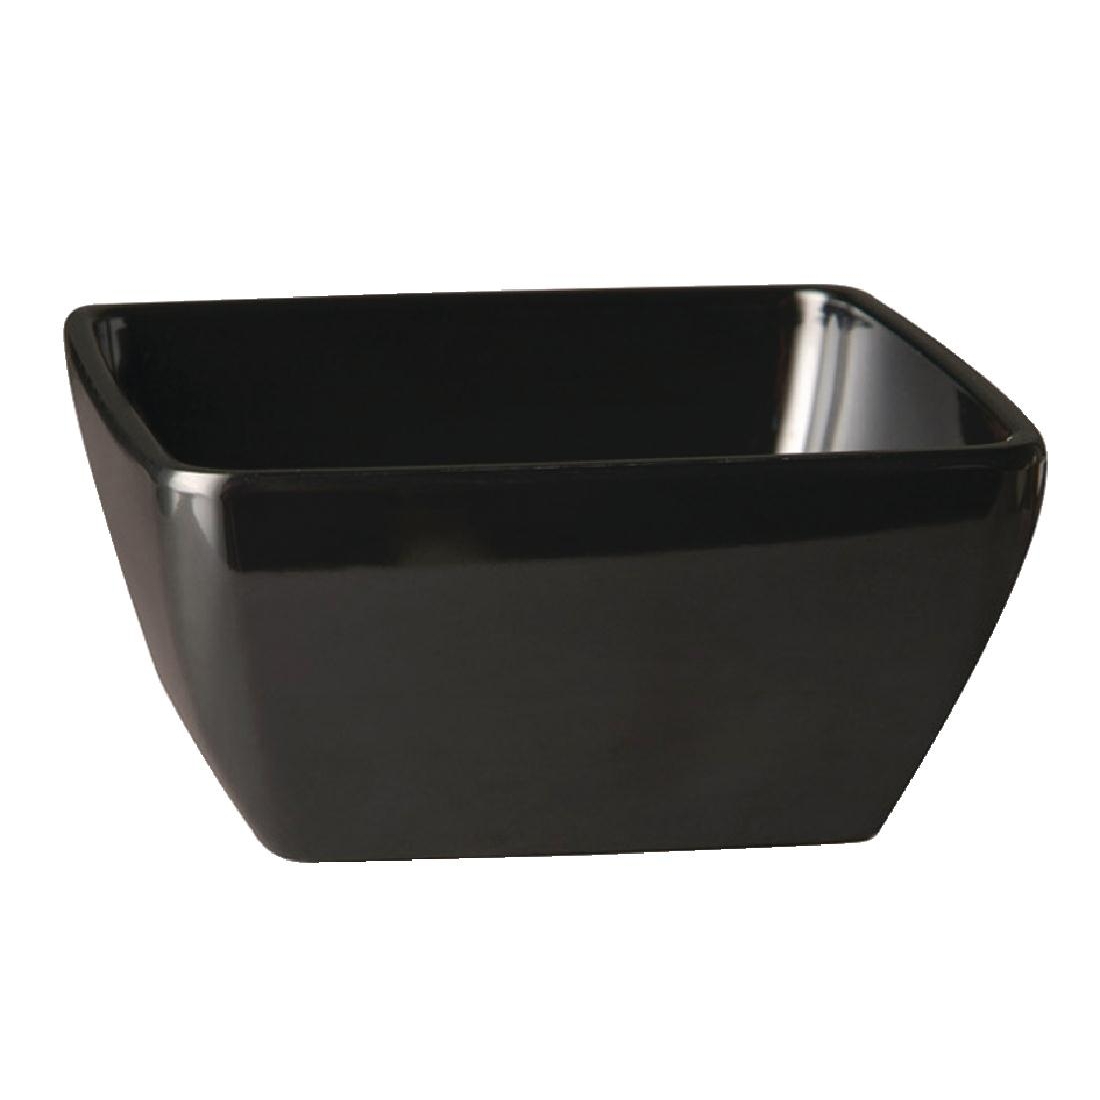 Special Offer APS Black Melamine Tray and Bowl Set with Signs and Holders